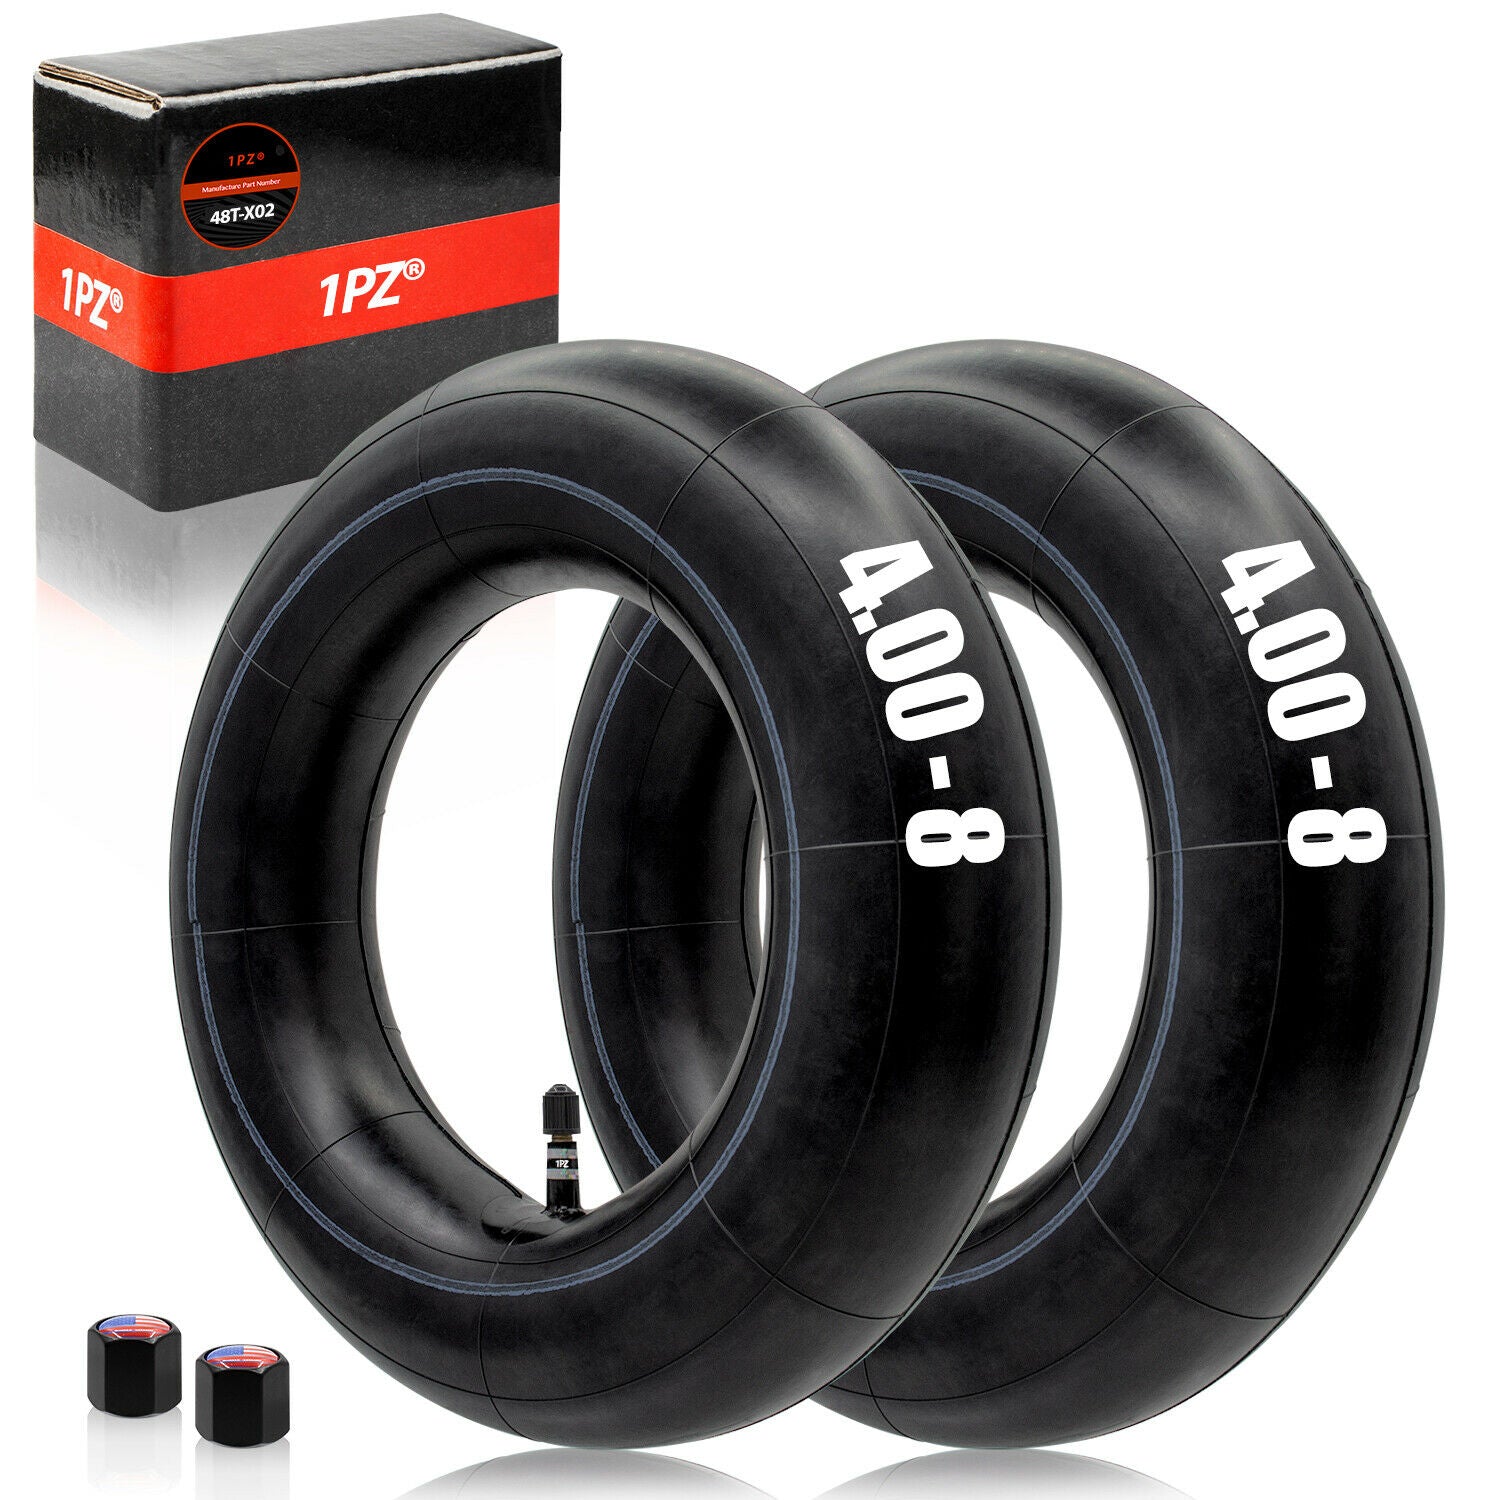 1PZ 4.80/4.00-8'' Inner Tubes with TR13 Straight Valve Stem Replacement for Mowers Hand Trucks Wheelbarrows Carts Generators Yard Trailers Dollies Trolleys Wagons